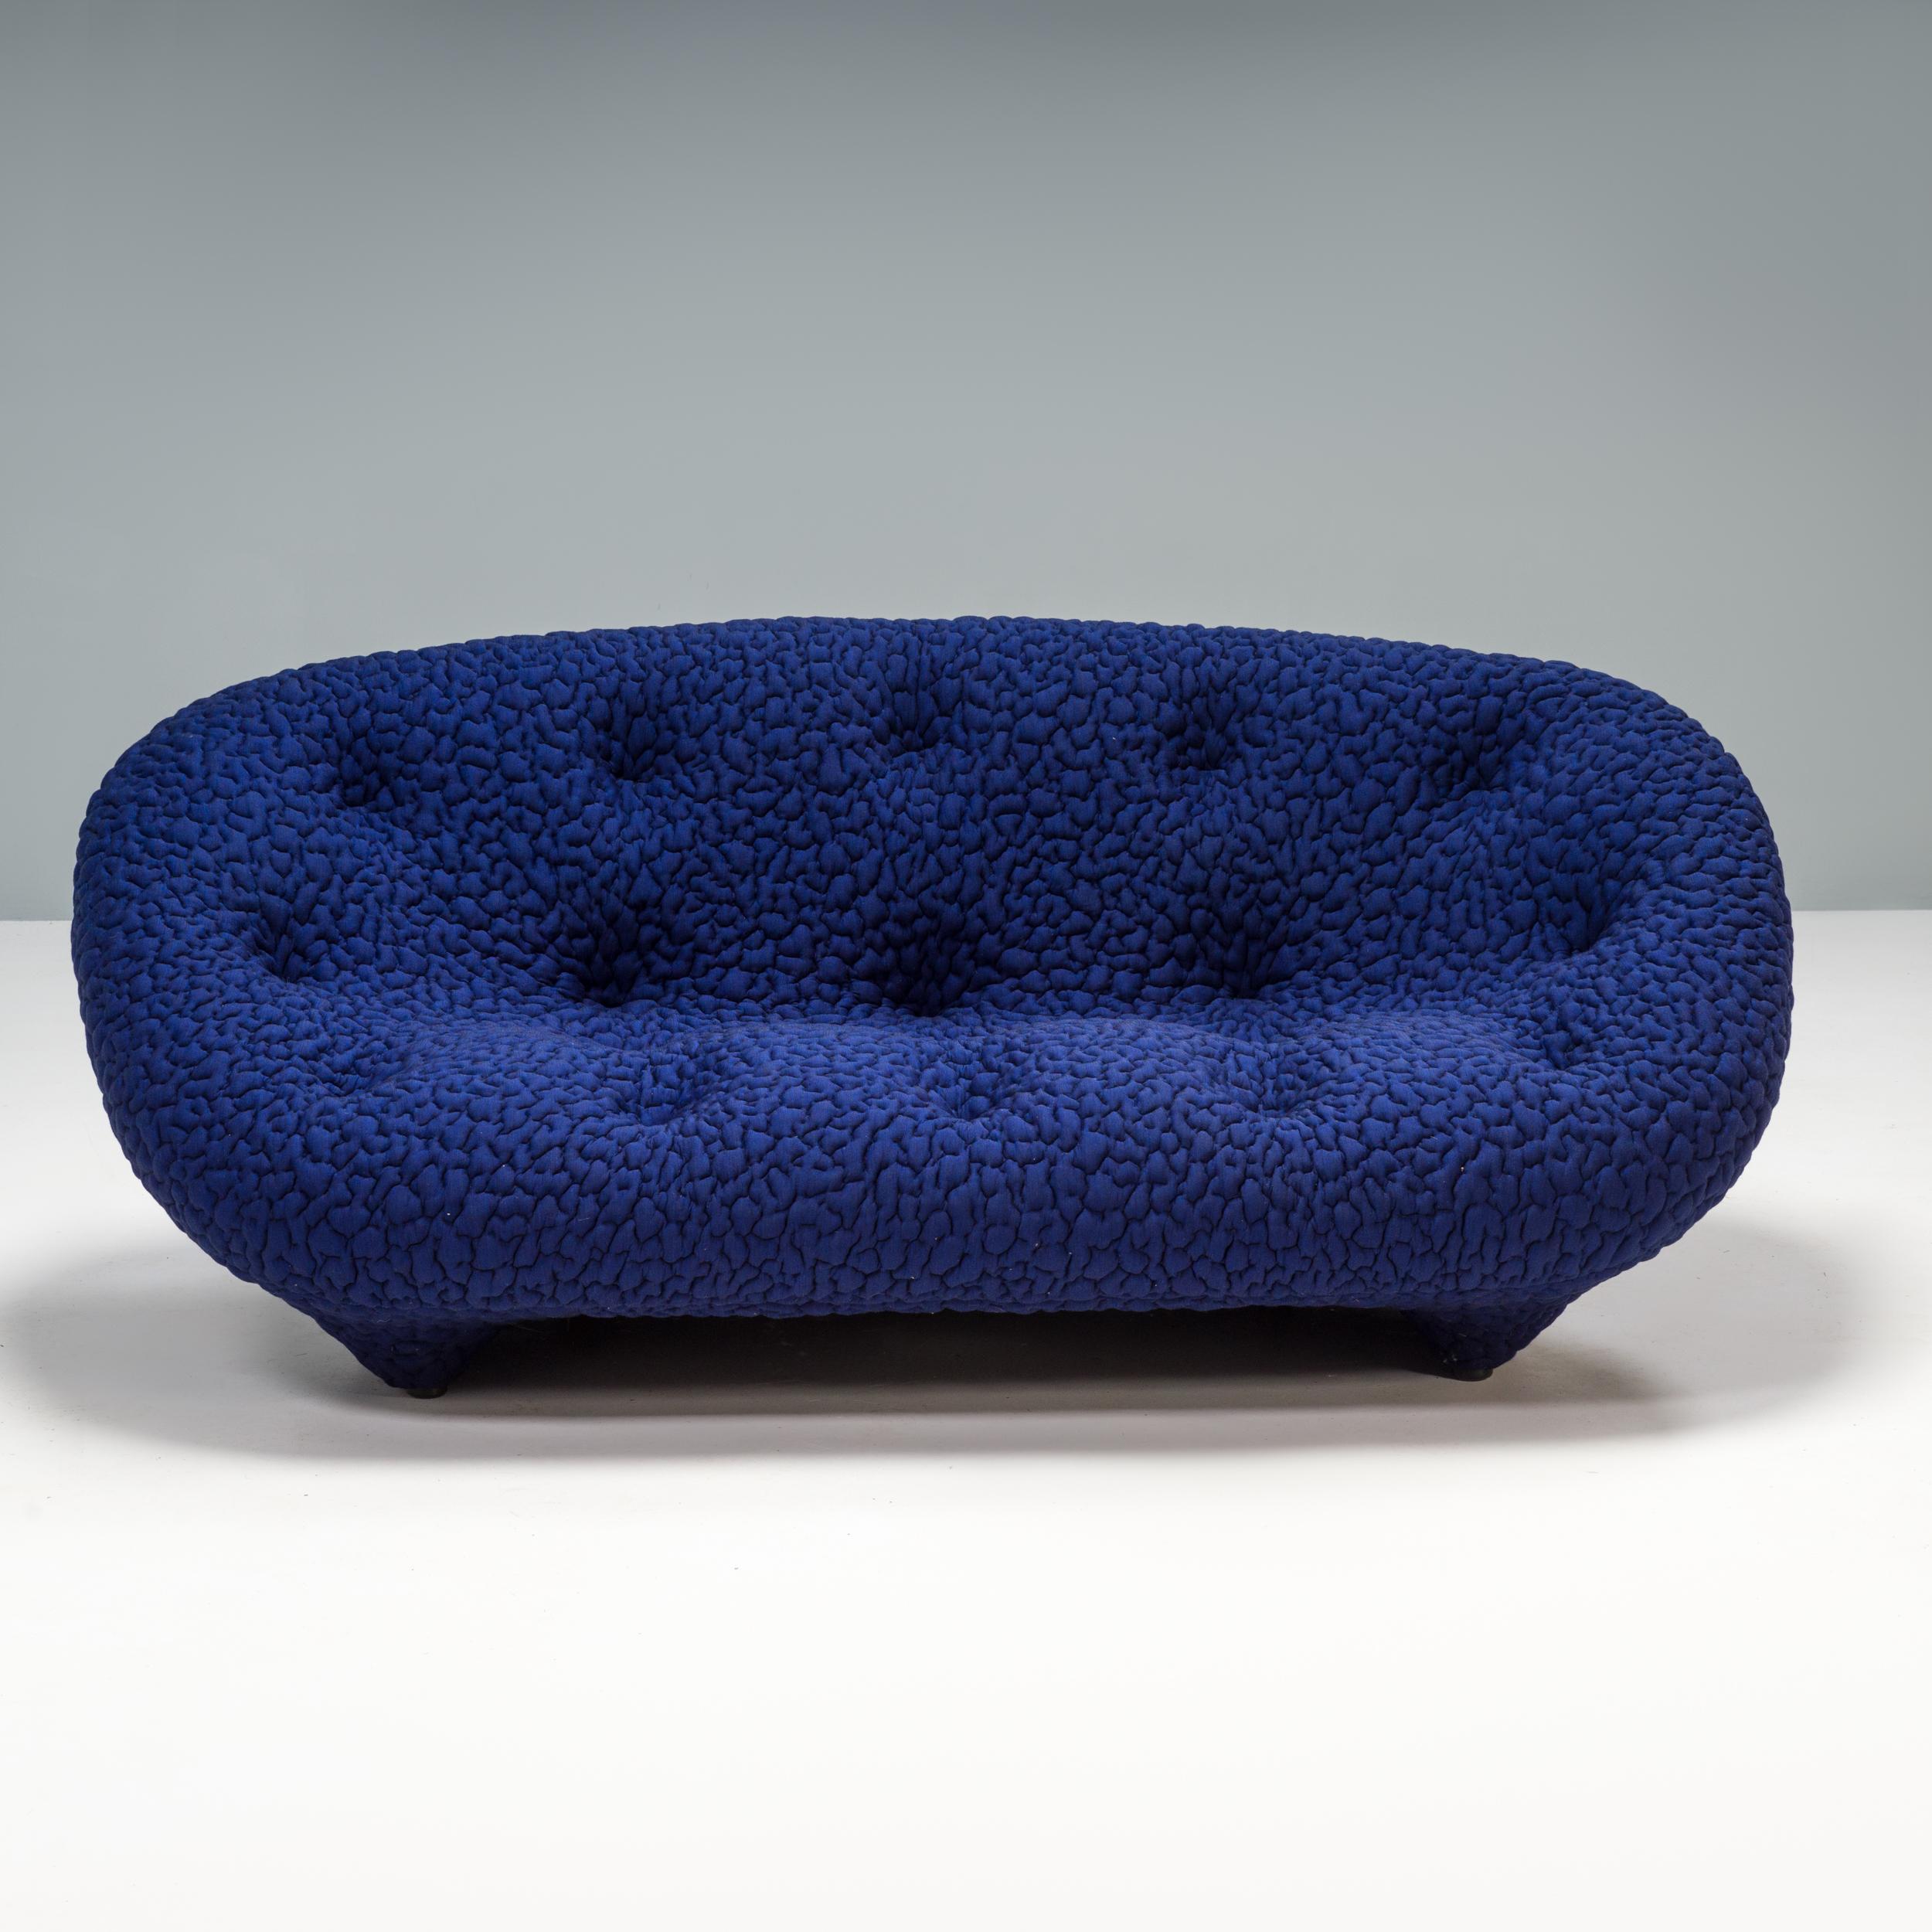 Designed by Erwan and Ronan Bouroullec for Ligne Roset, the Pluom sofa is a fantastic example of modern design.

The organic shape is formed from tubular steel and wire mesh with layers of foam to ensure the ultimate comfort, while the high back